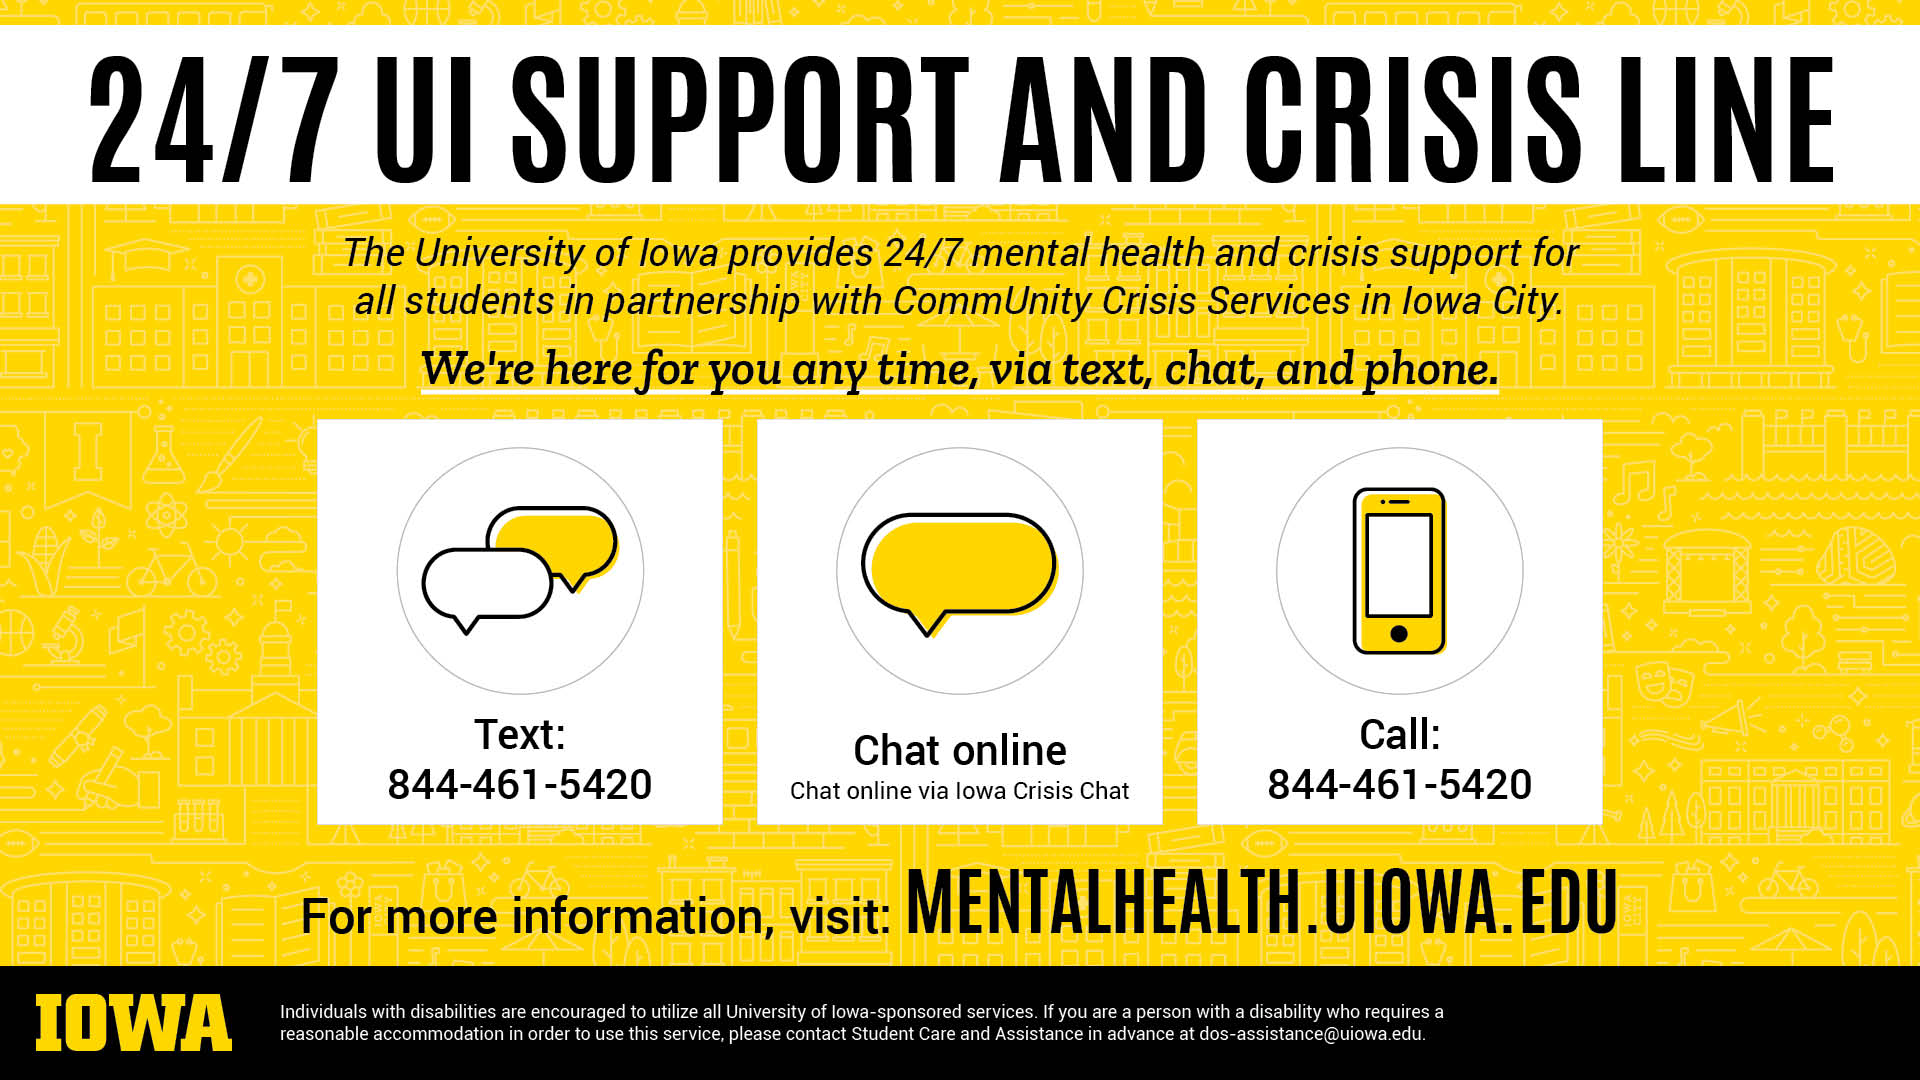 24/7 UI Support and Crisis Line. The University of Iowa provides 24/7 mental health support for all students in partnership with Community Crisis Services in Iowa City. For more information, visit mentalhealth.uiowa.edu